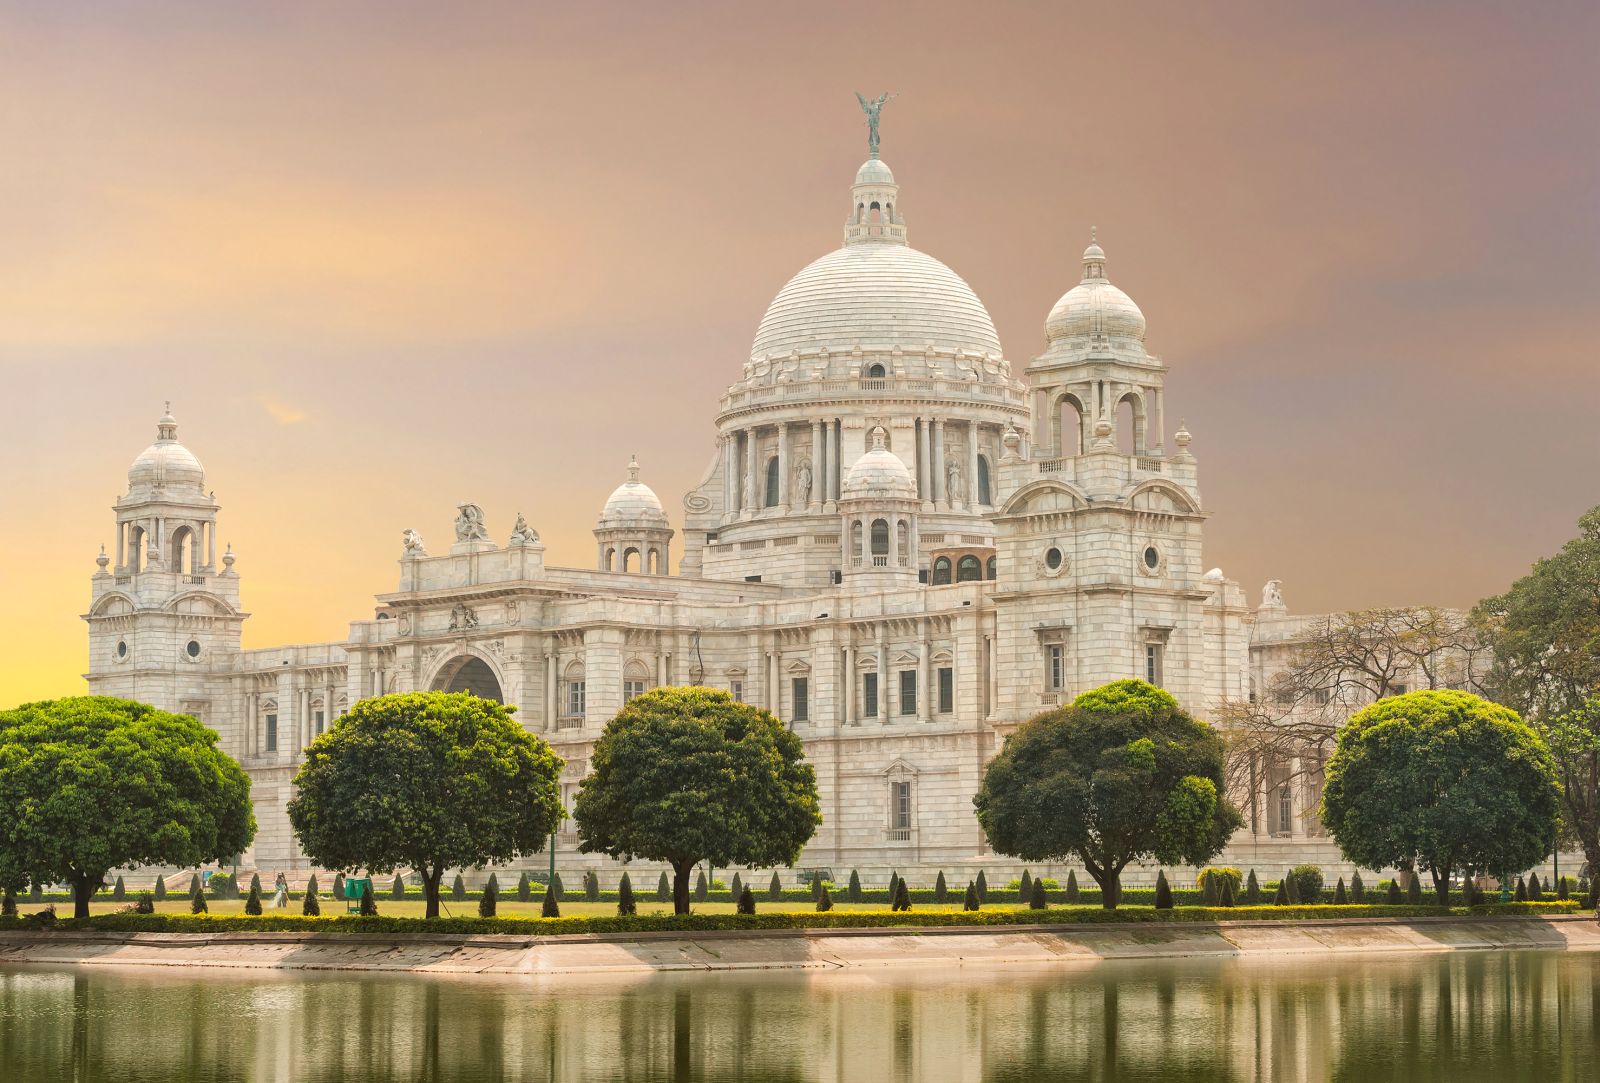 The Victoria Memorial, a beautiful white marble building with a domed roof and a river and trees in front, in Kolkata, West Bengal, India